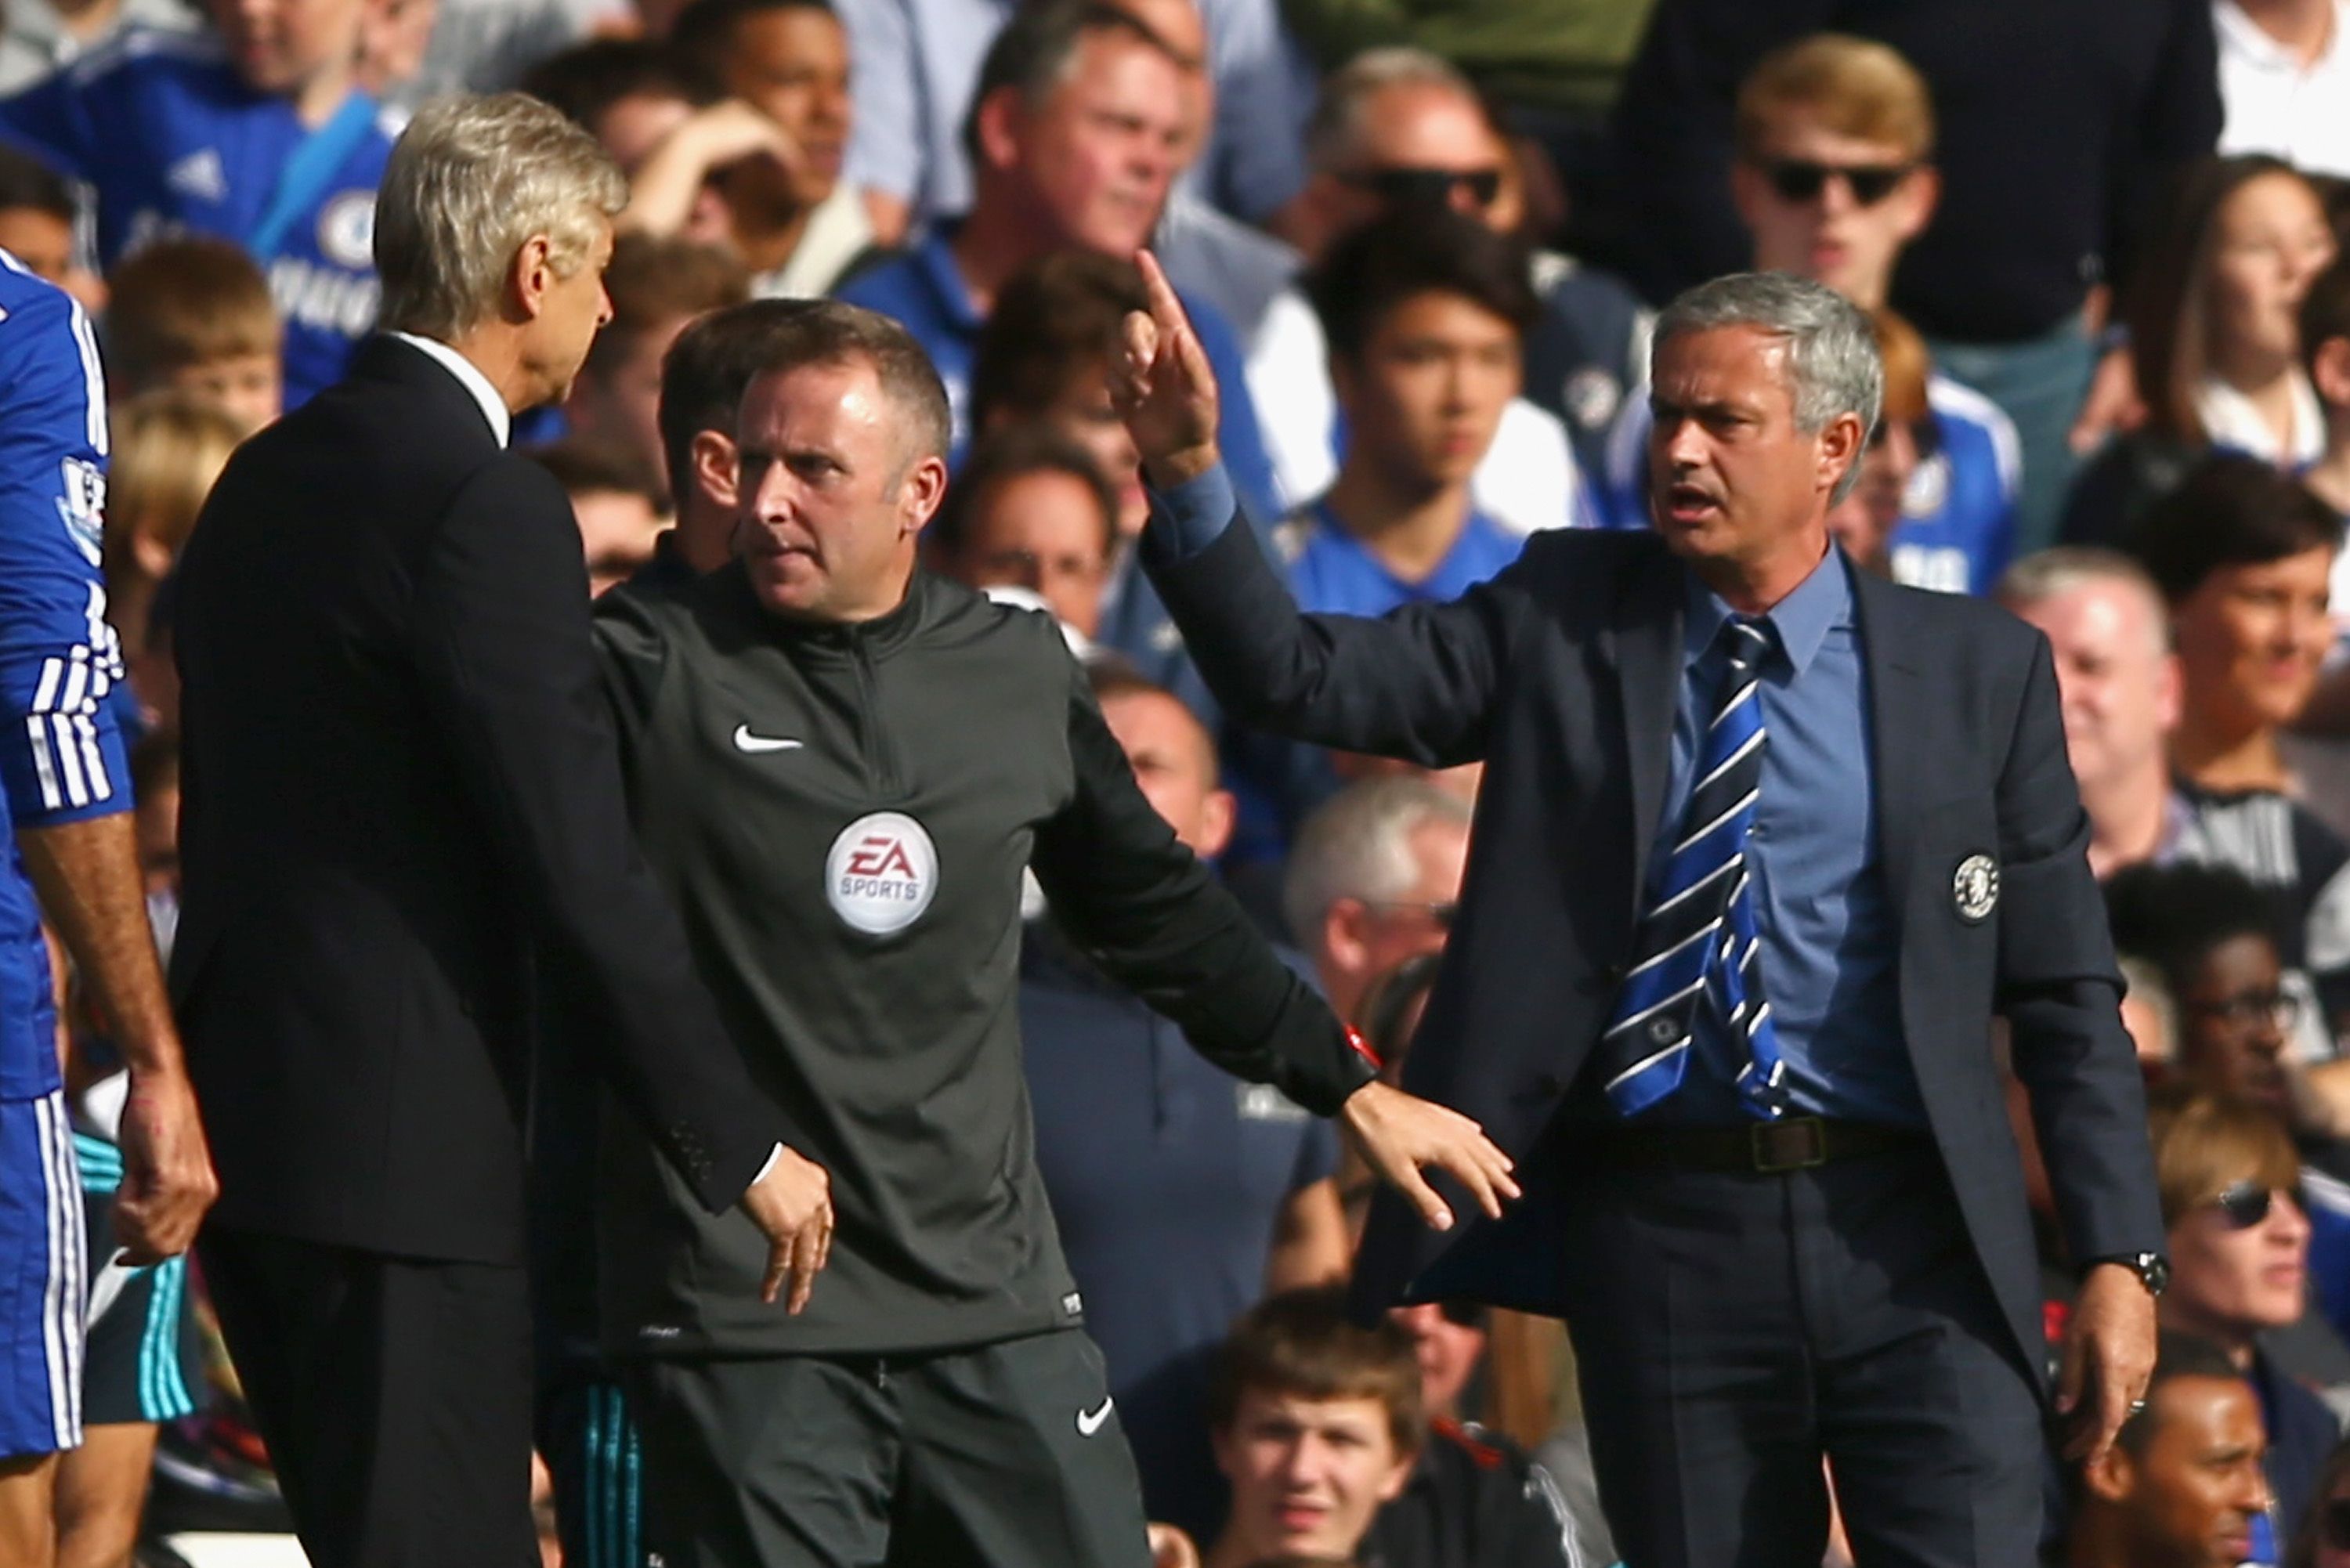 LONDON, ENGLAND - OCTOBER 05: Fourth Official Jonathan Moss comes between Managers Arsene Wenger of Arsenal and Jose Mourinho manager of Chelsea during the Barclays Premier League match between Chelsea and Arsenal at Stamford Bridge on October 4, 2014 in London, England. (Photo by Paul Gilham/Getty Images)